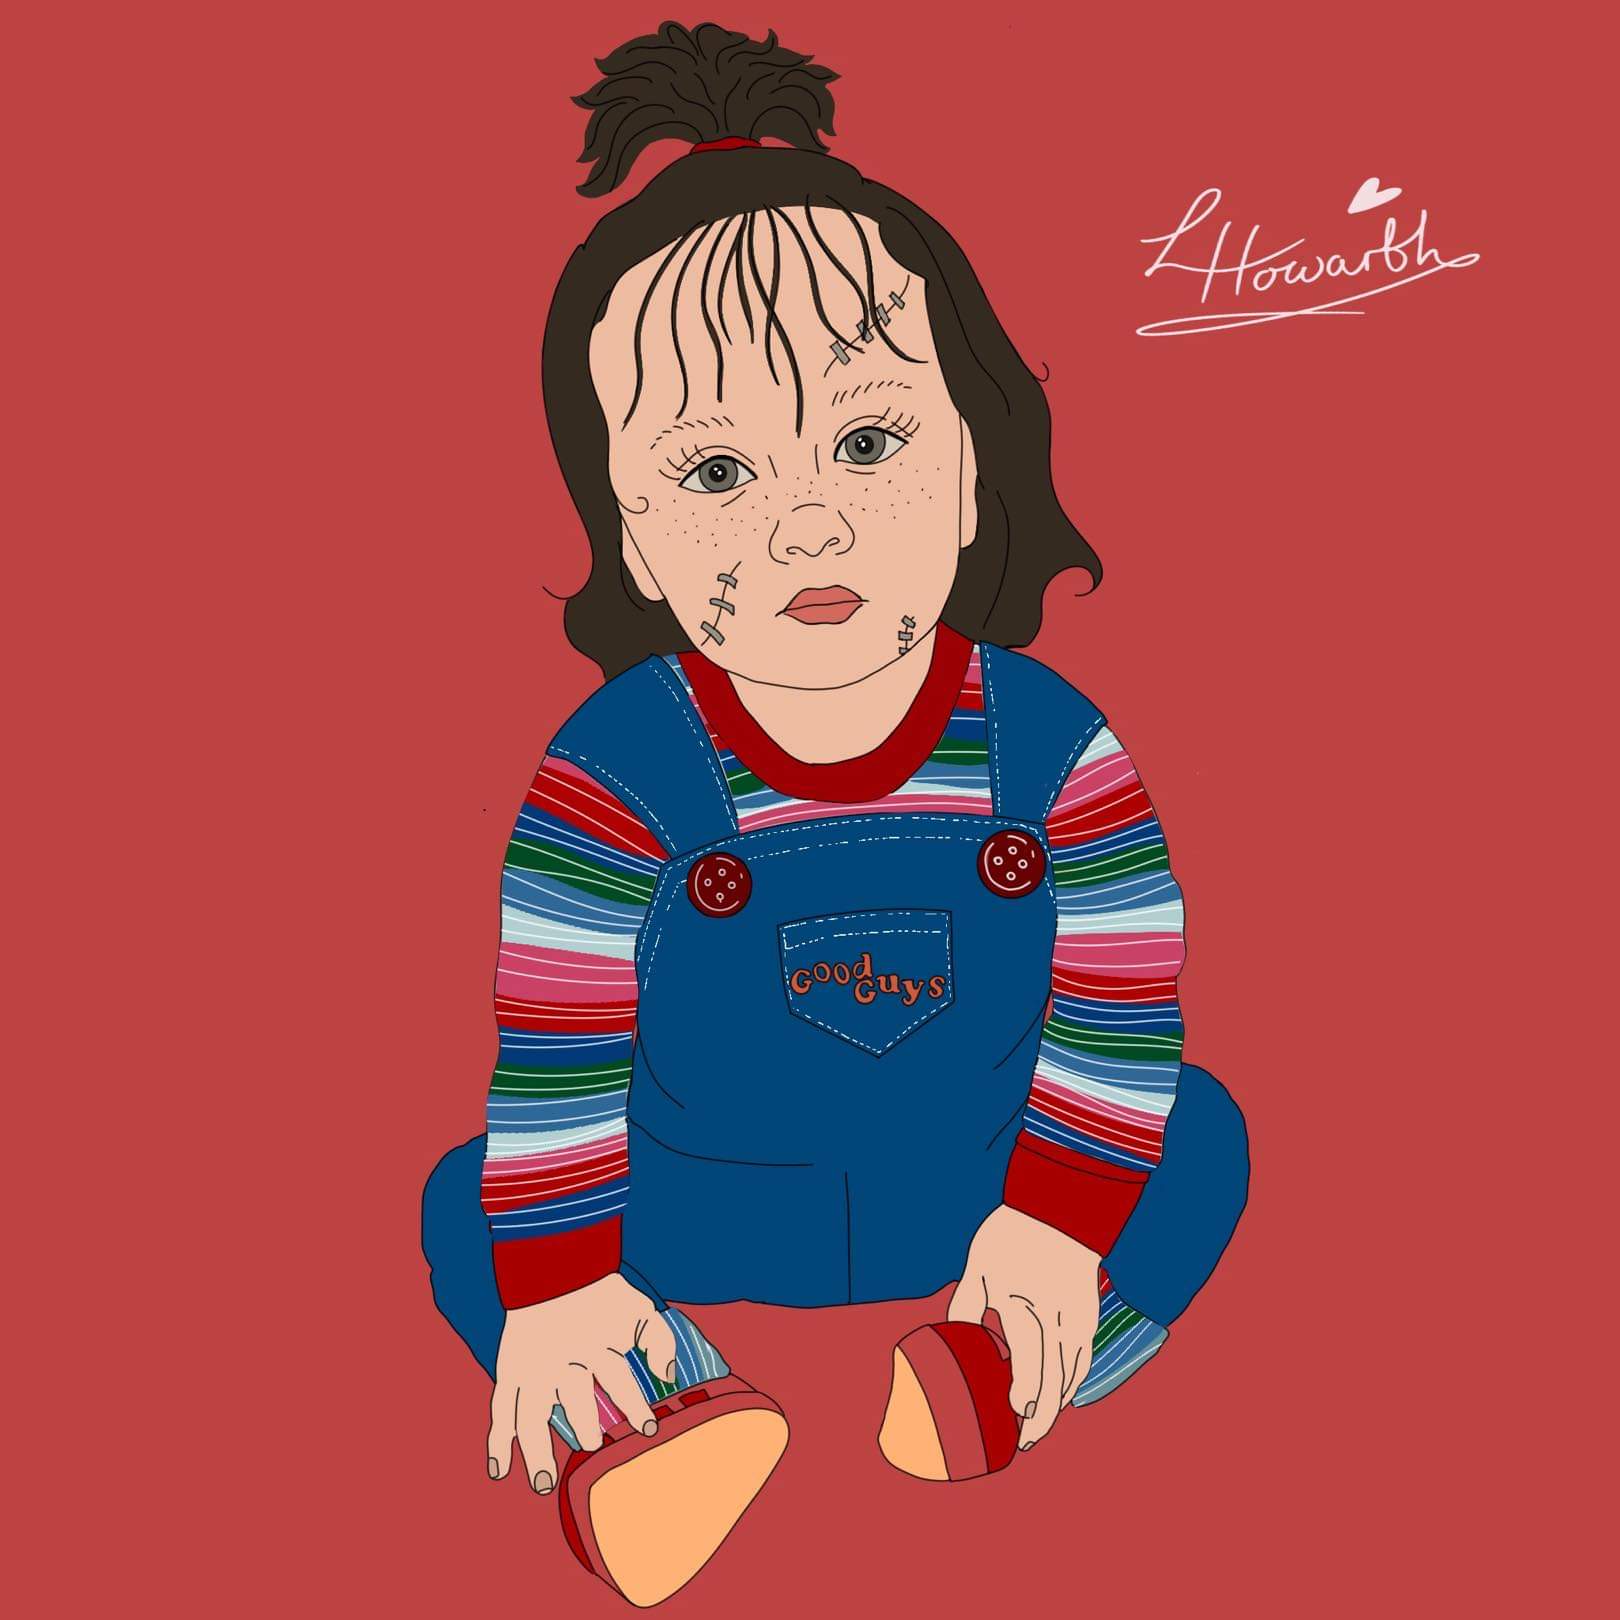 My adorable nephew turned into chucky as requested by my sister in law